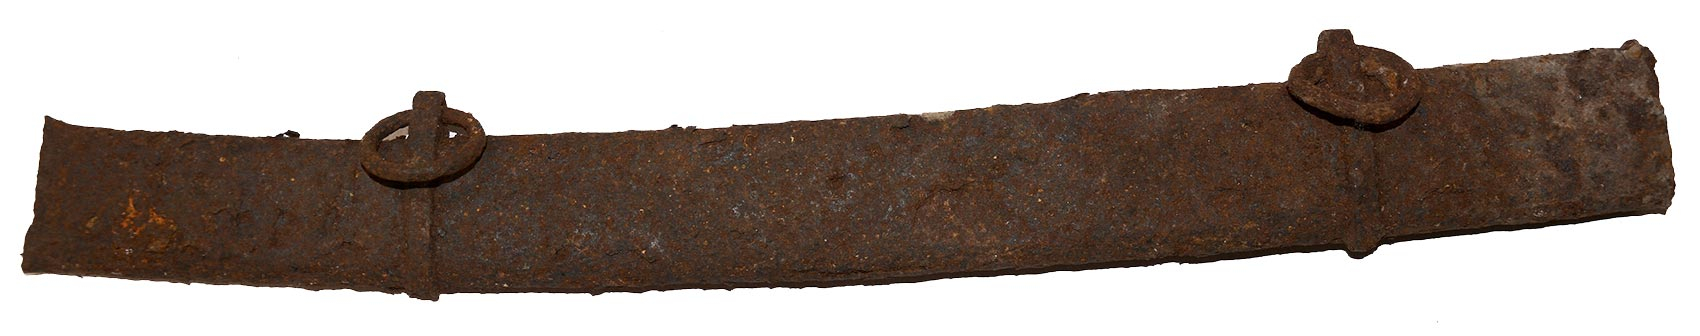 RELIC PART OF SWORD SCABBARD – RECOVERED NEAR FREDERICKSBURG